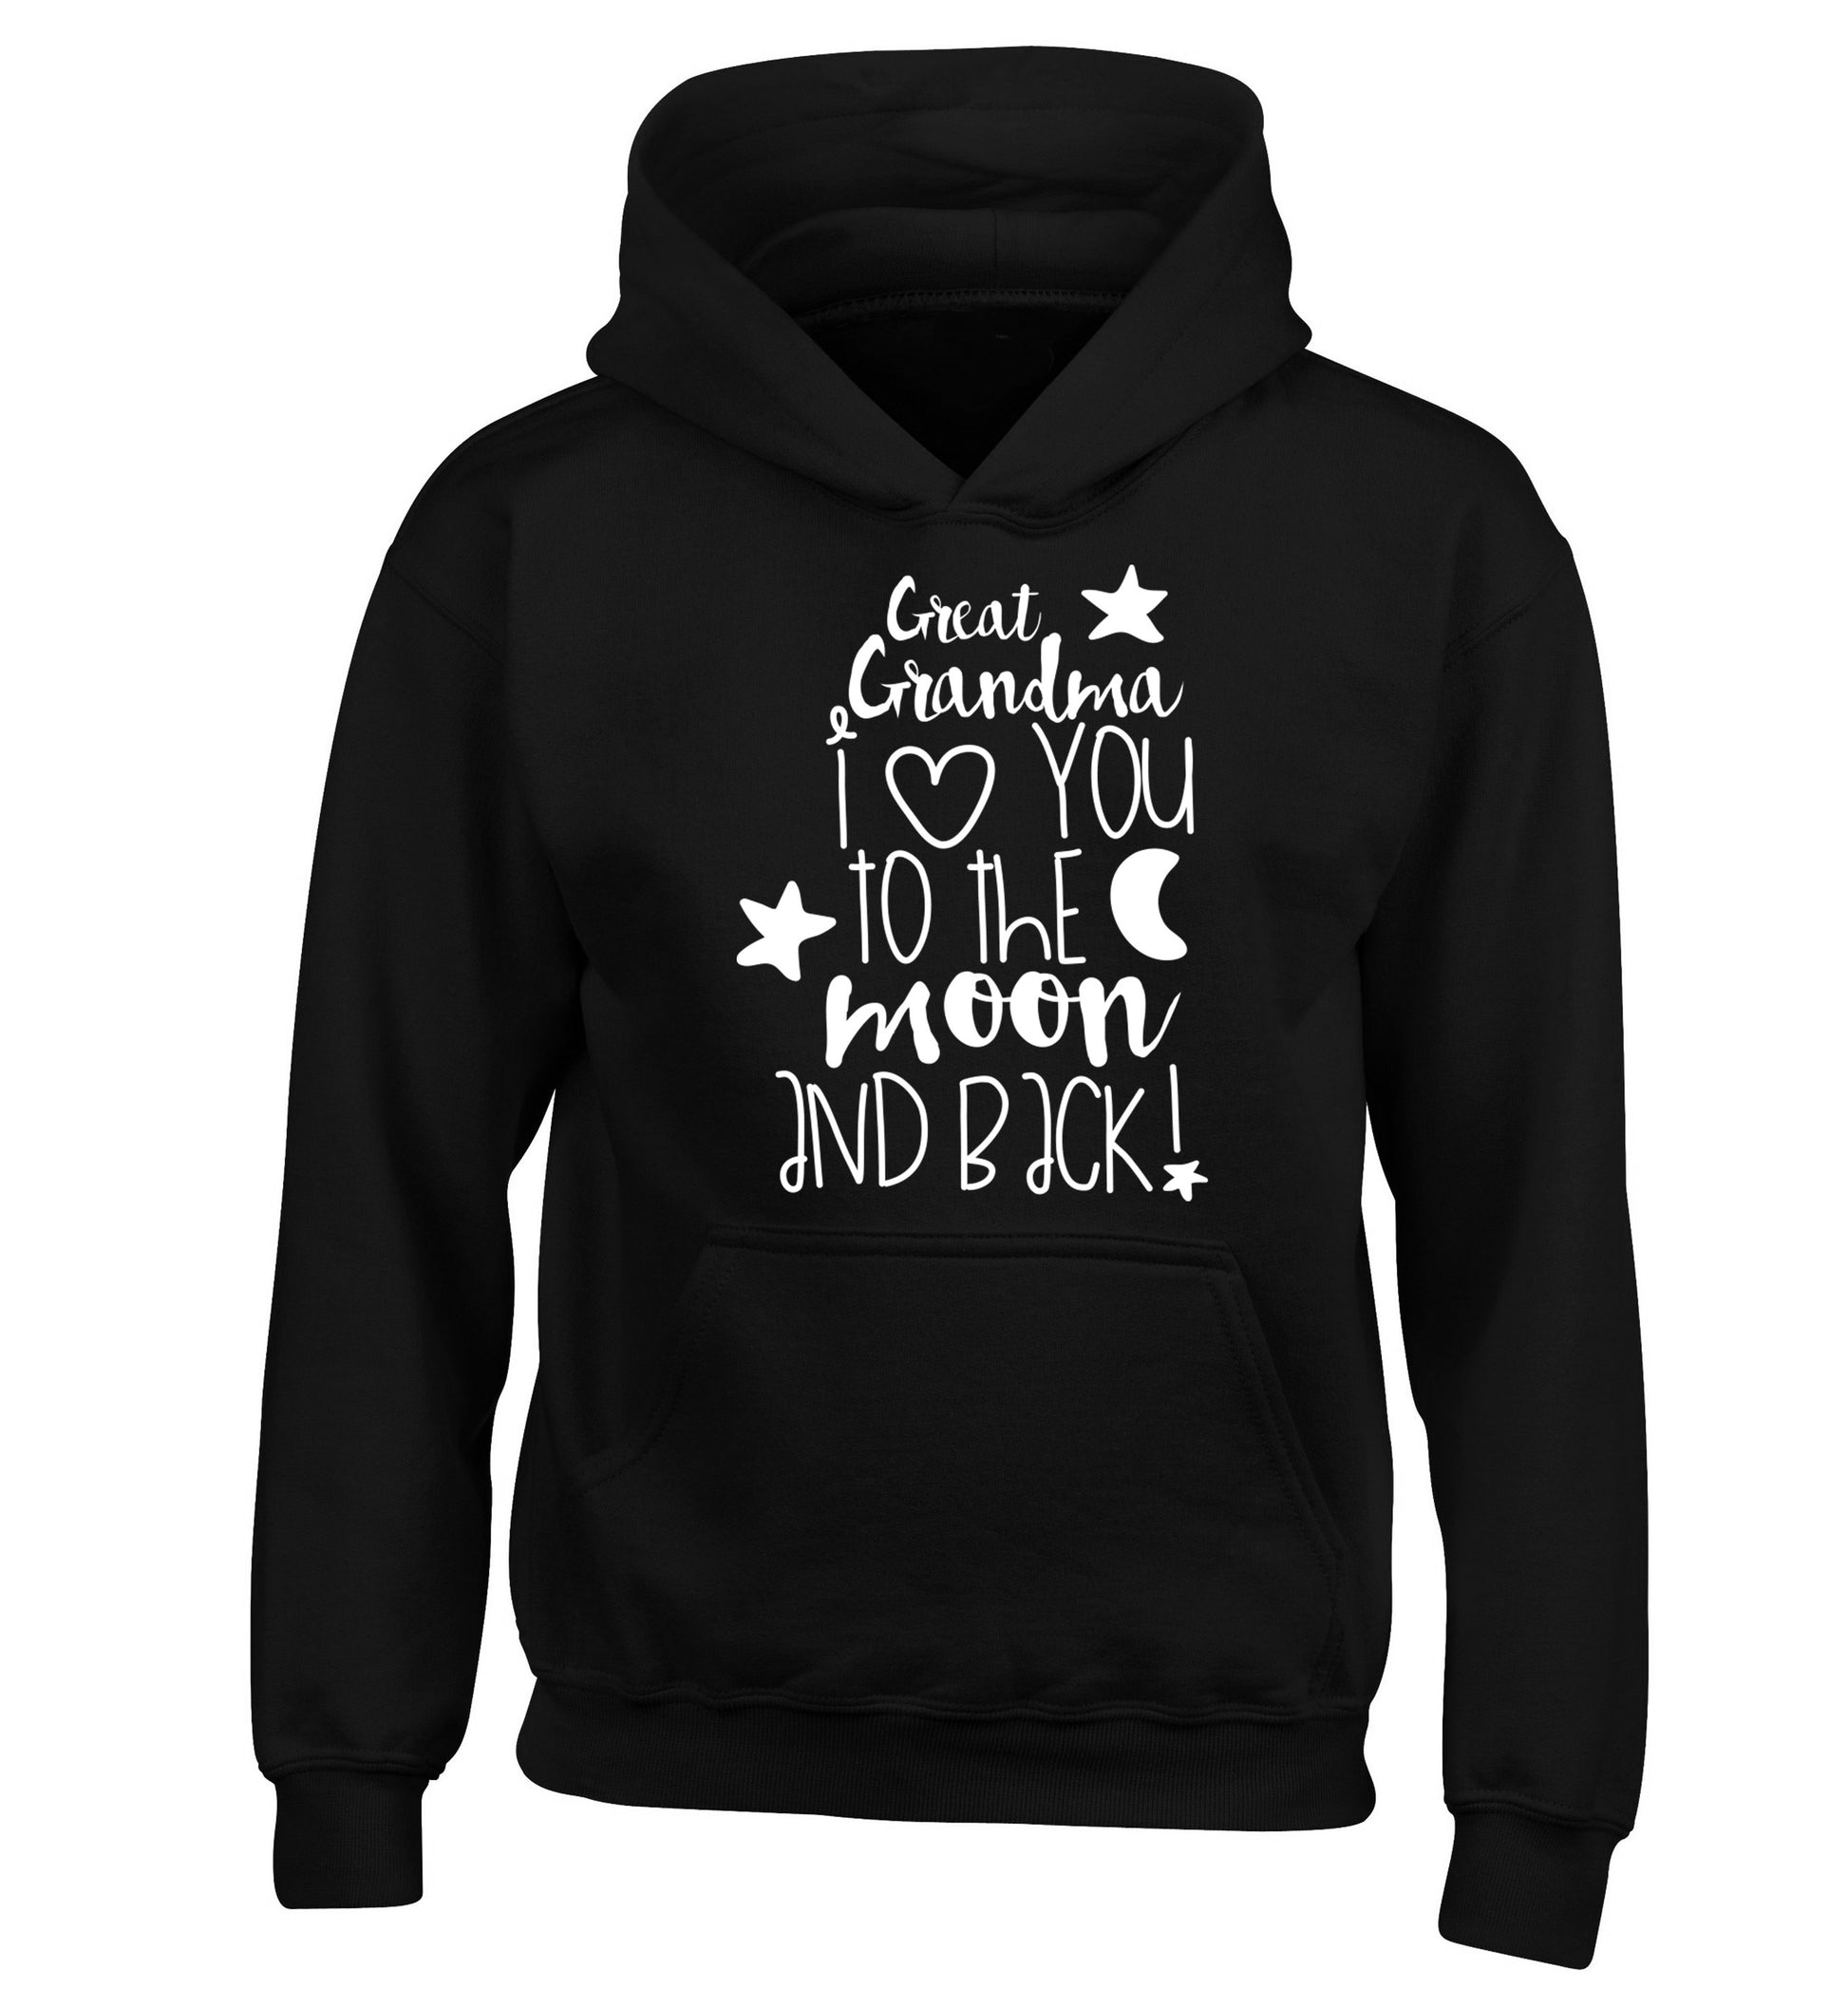 Great Grandma I love you to the moon and back children's black hoodie 12-14 Years